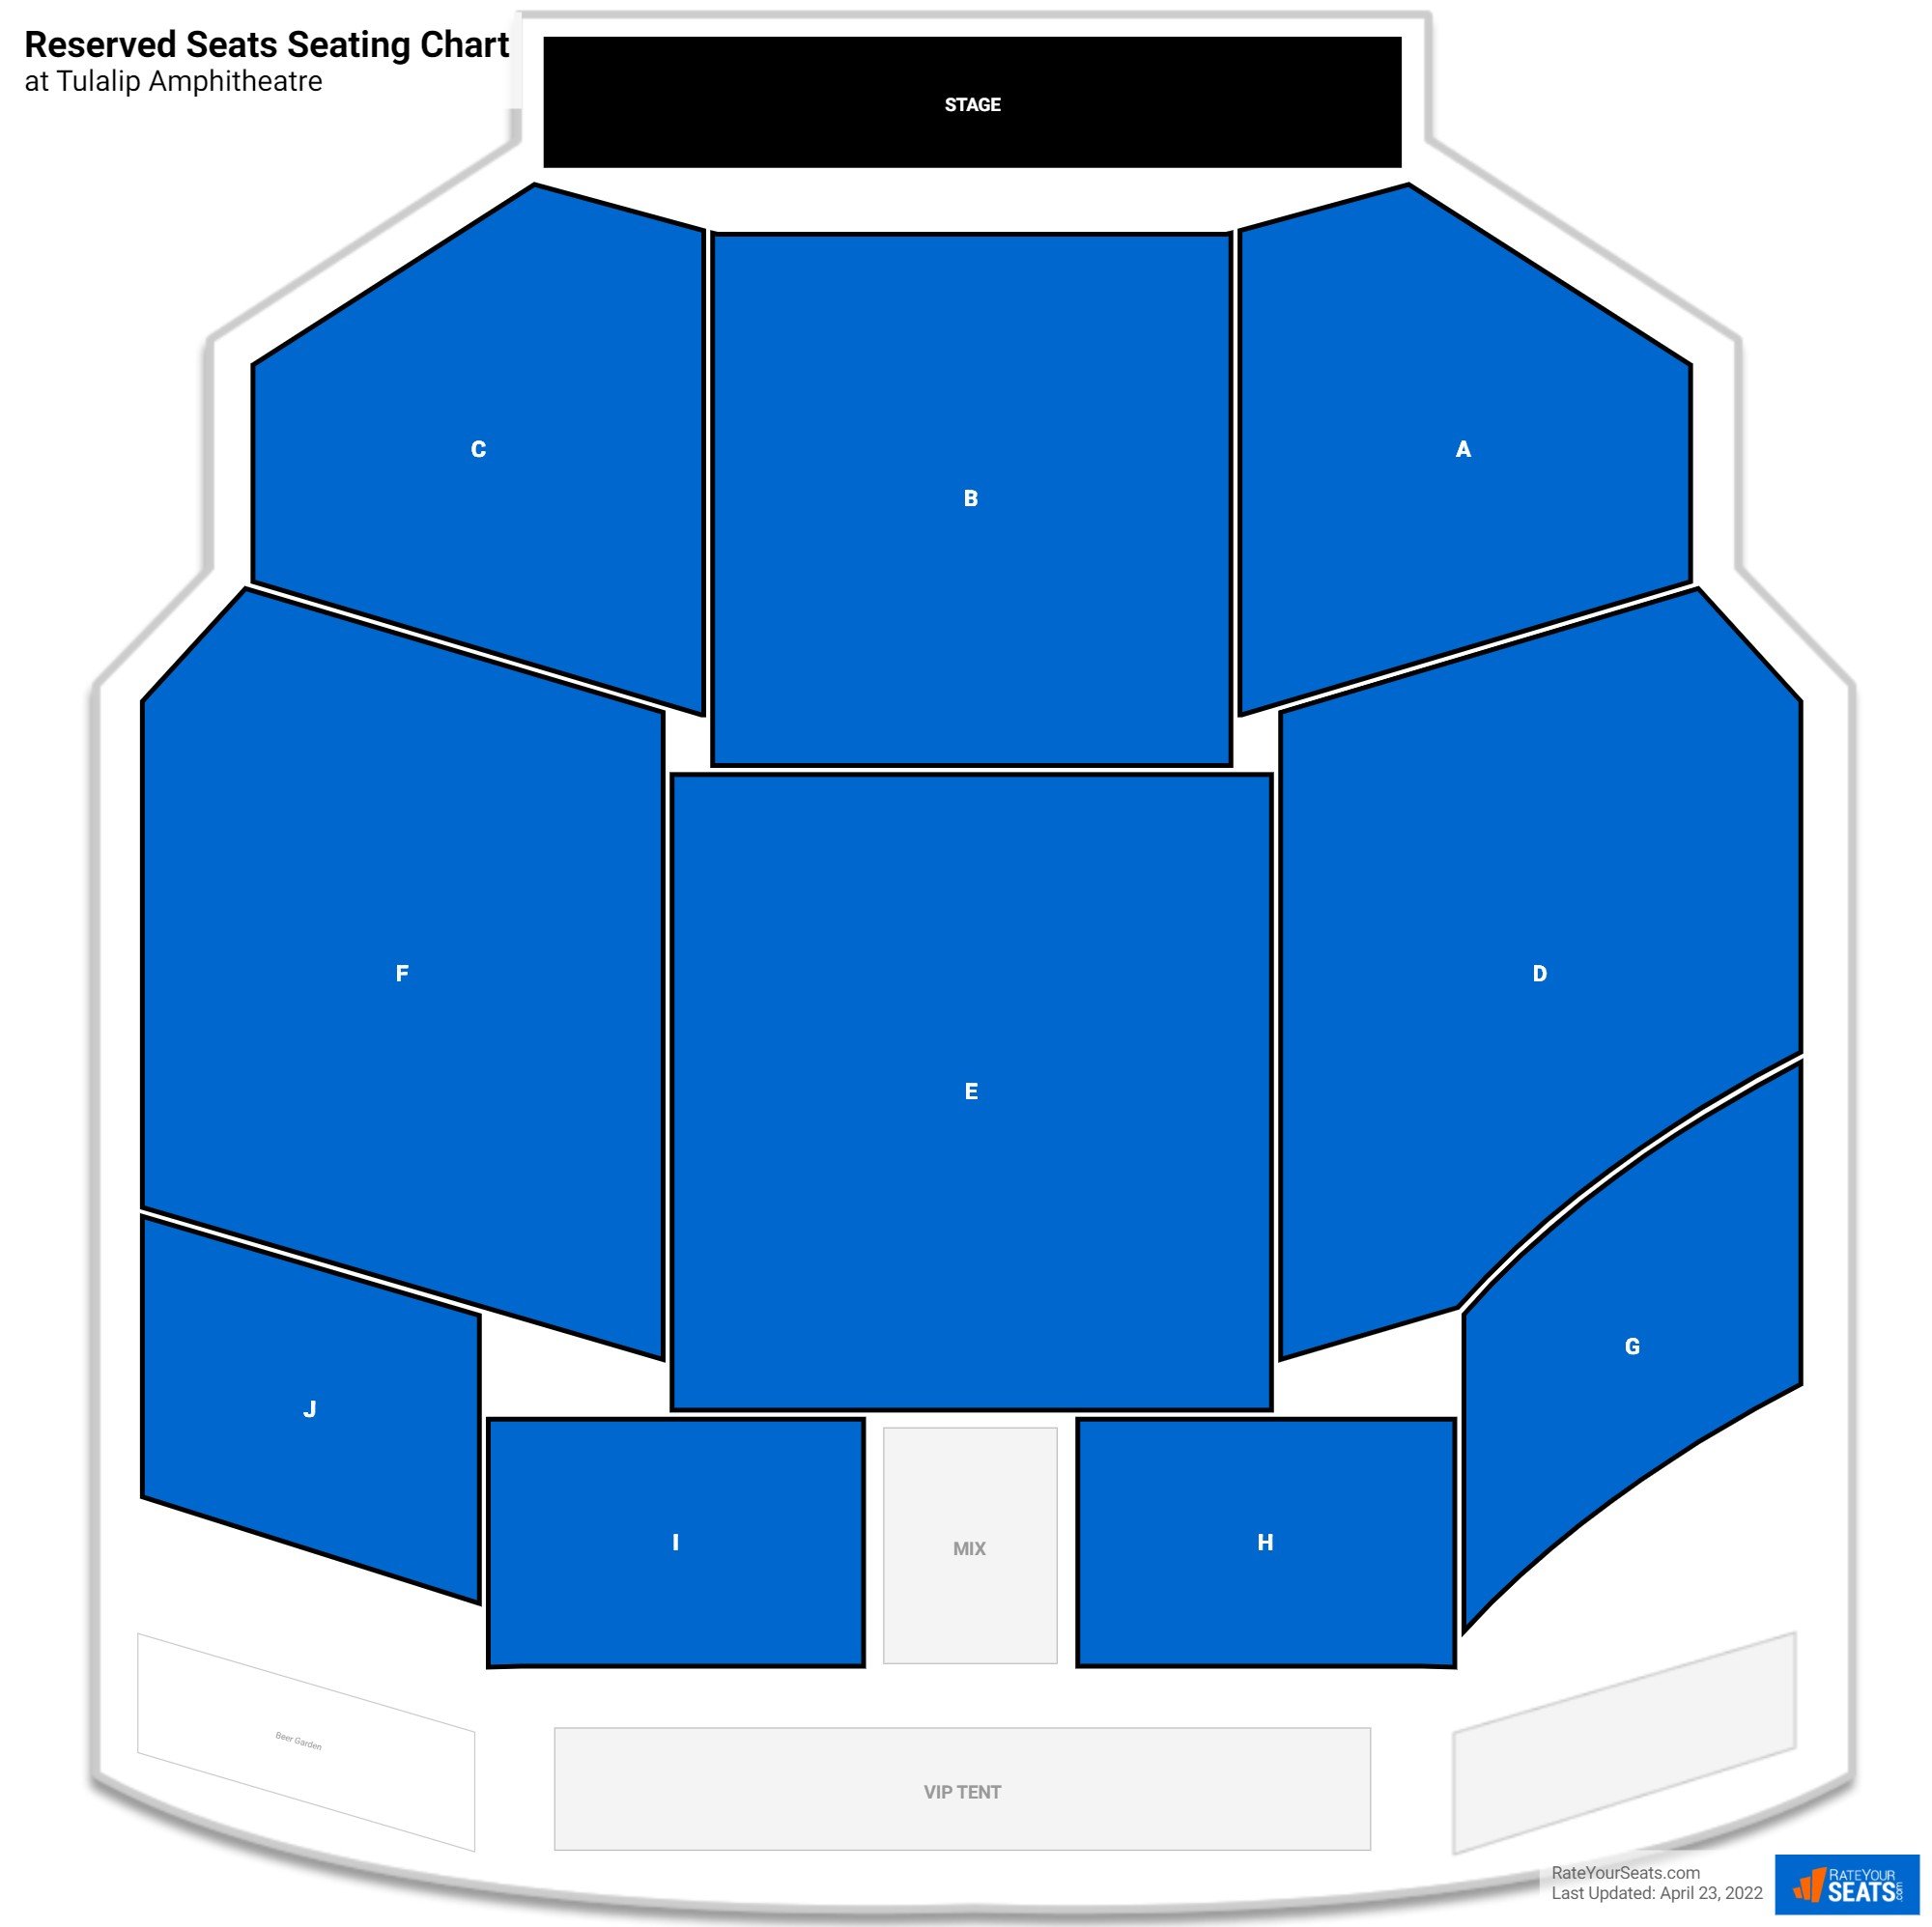 Concert Reserved Seats Seating Chart at Tulalip Amphitheatre